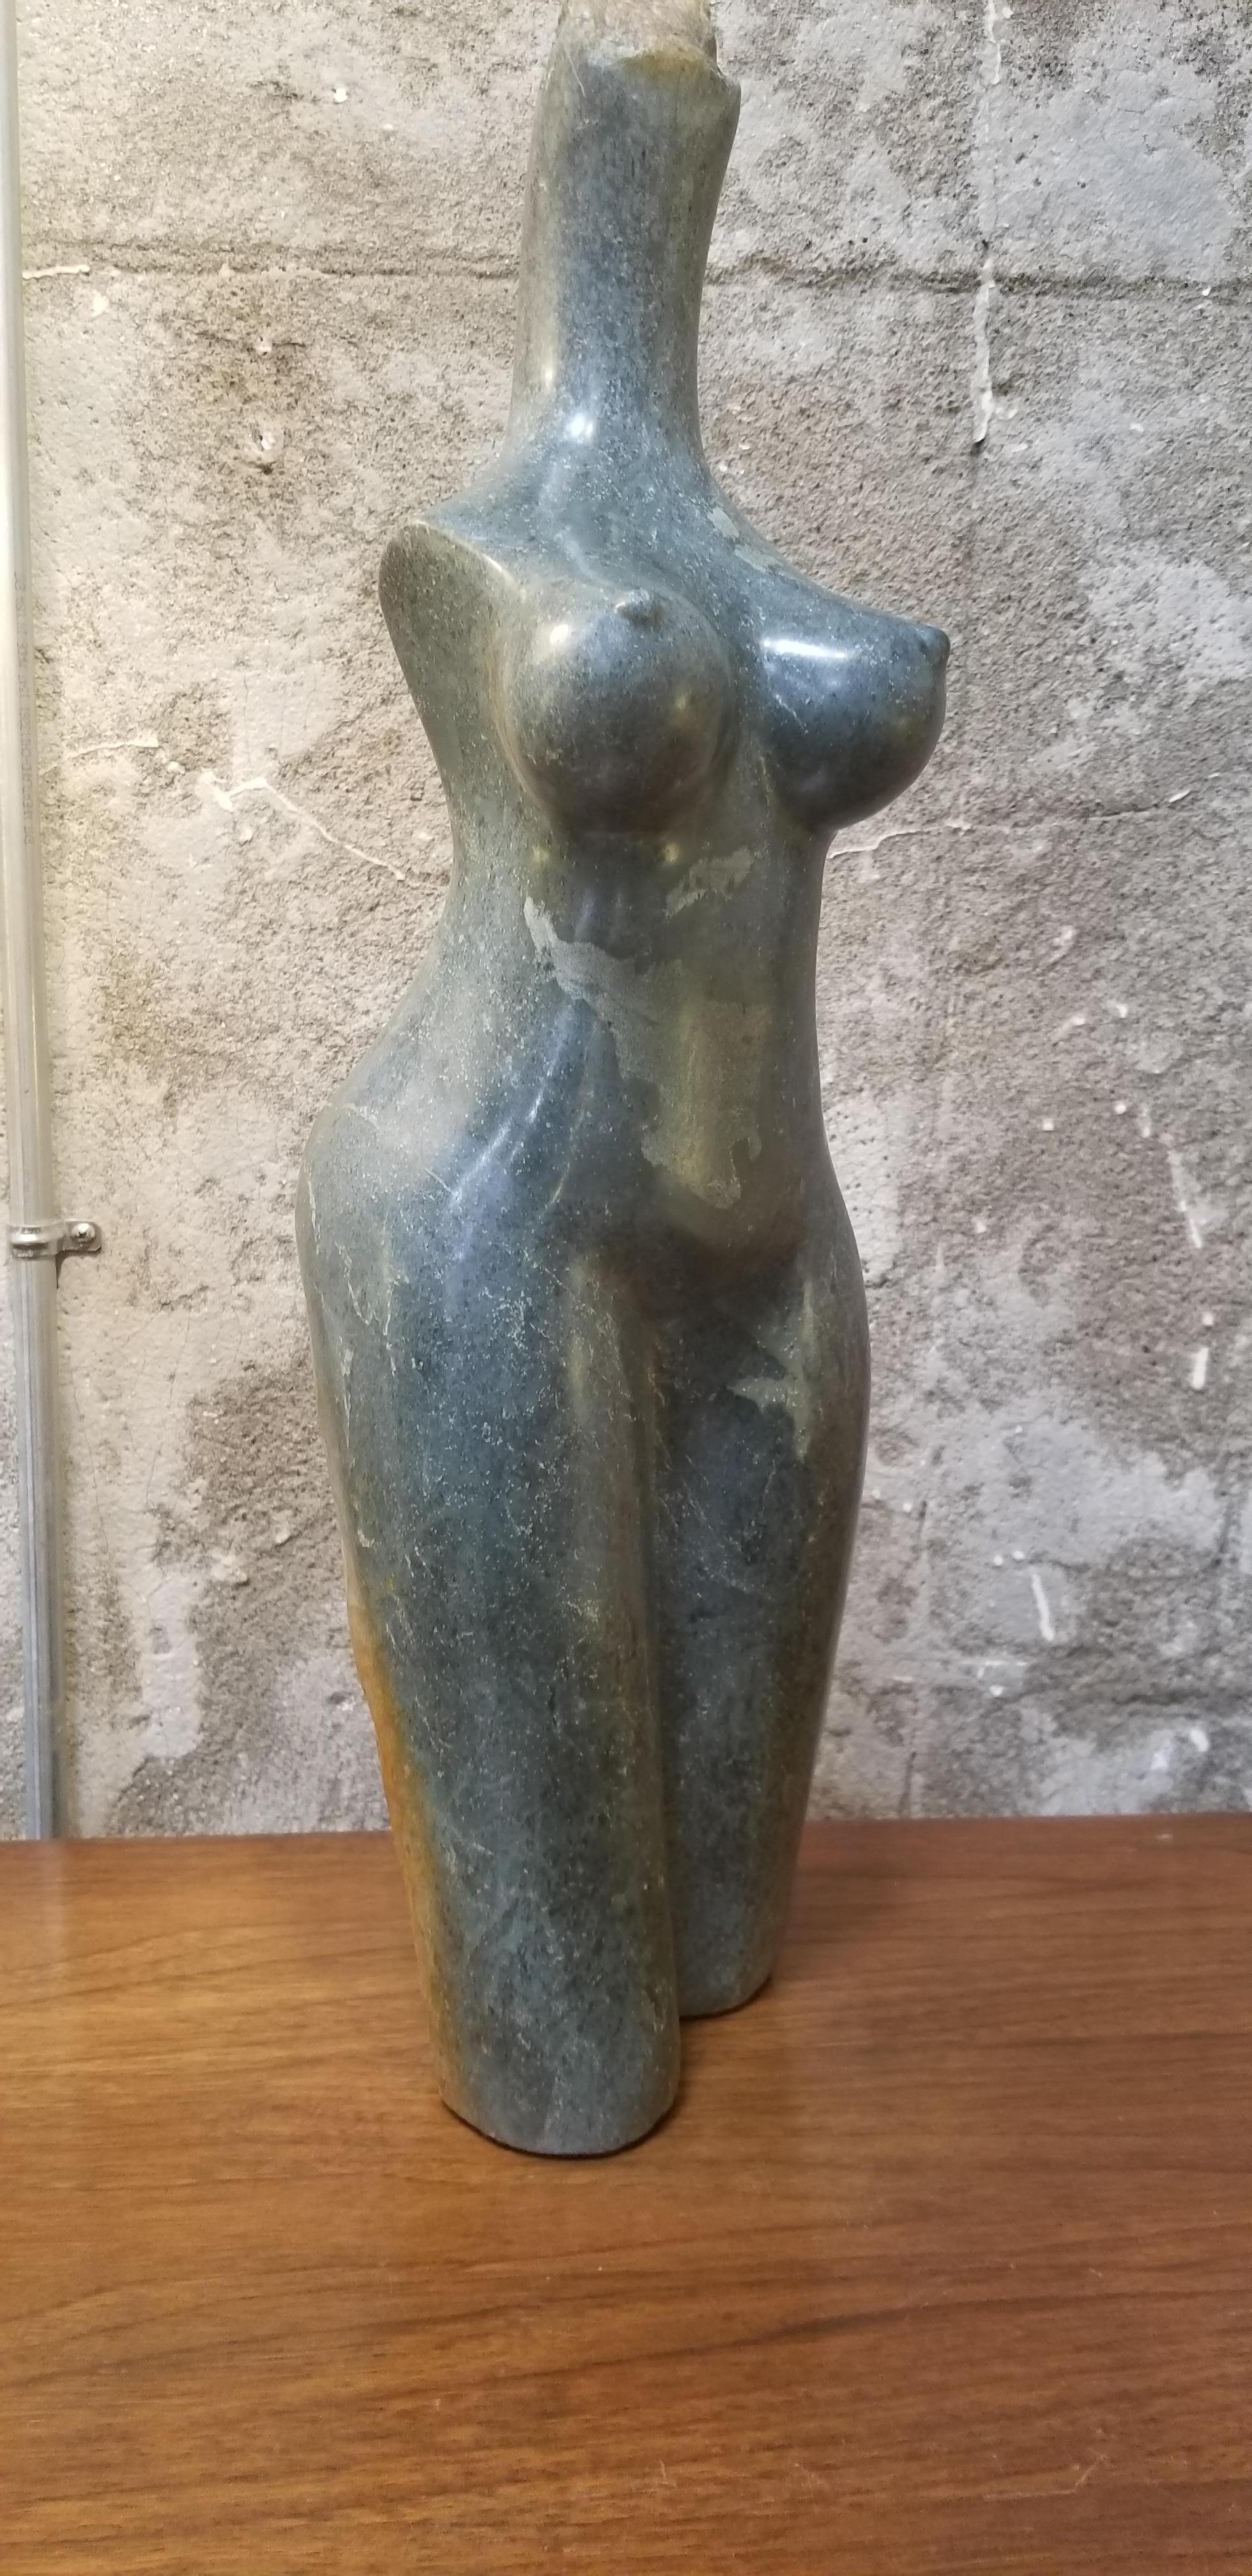 A hand-sculpted and polished stone sculpture of a woman's torso by South African artist Robert Chimika. Artist signed at base.